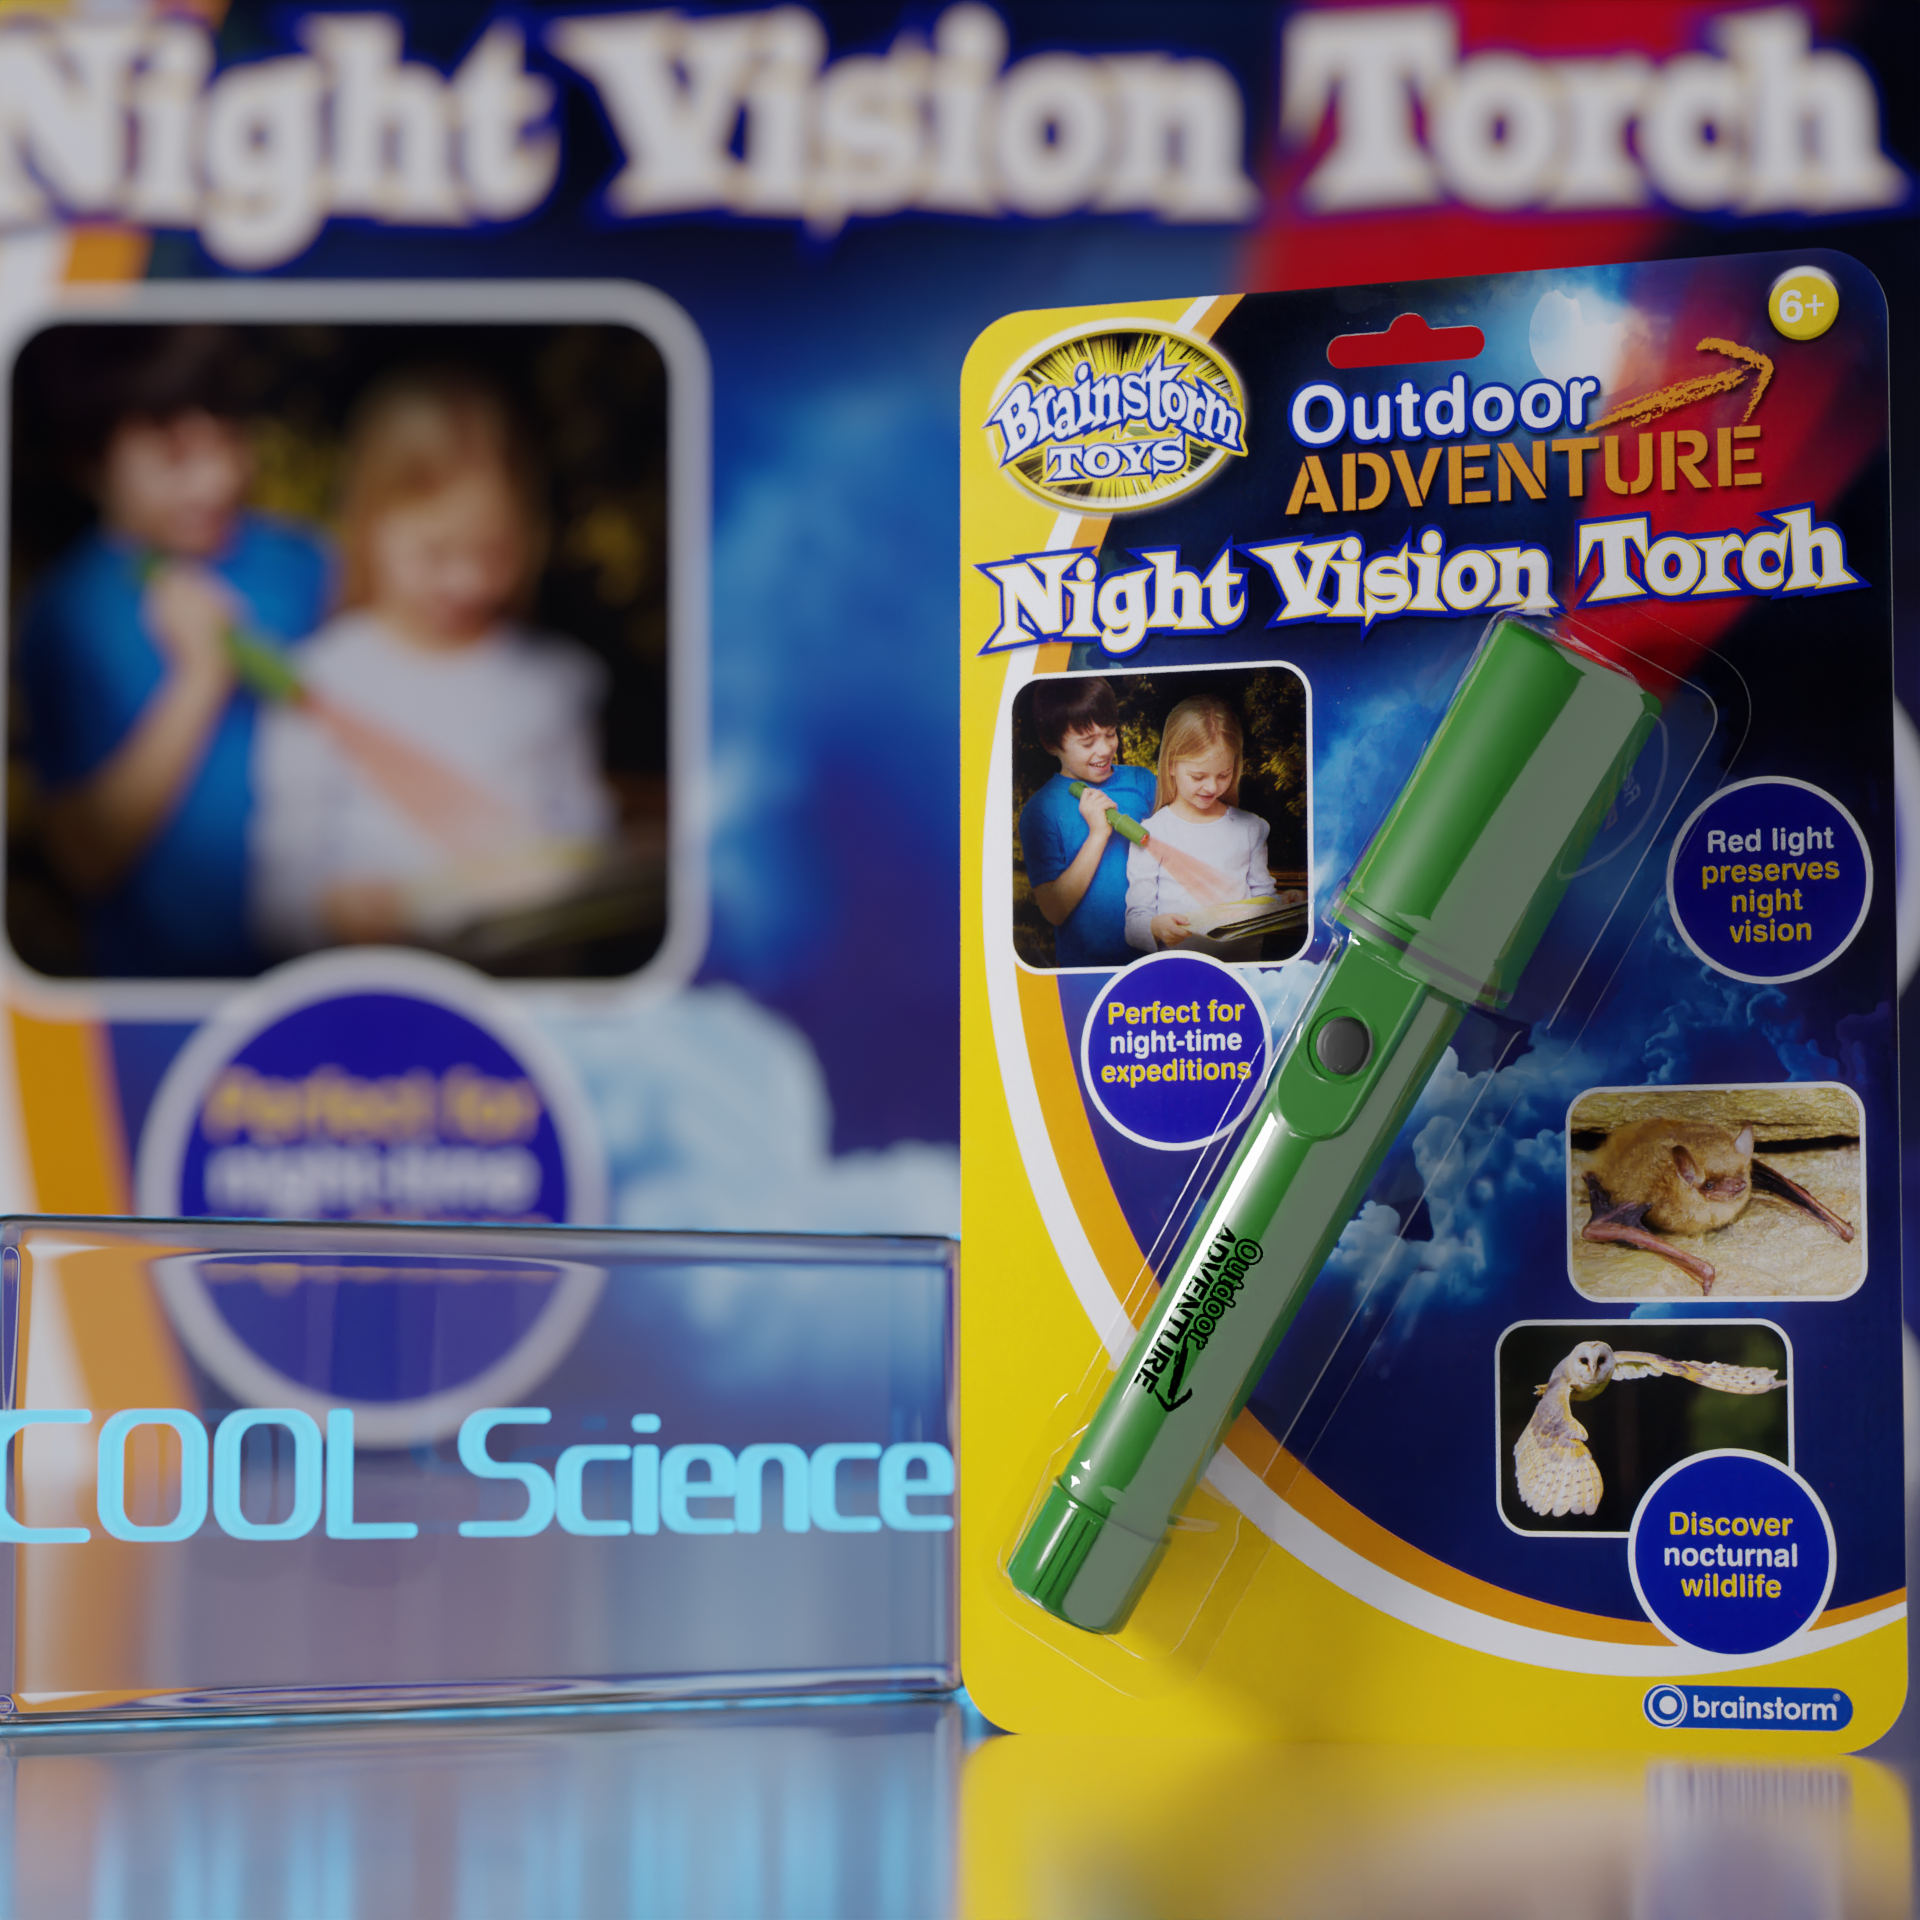 Front View of the Brainstorm Outdoor Adventure Night Vision Torch on it’s backing card